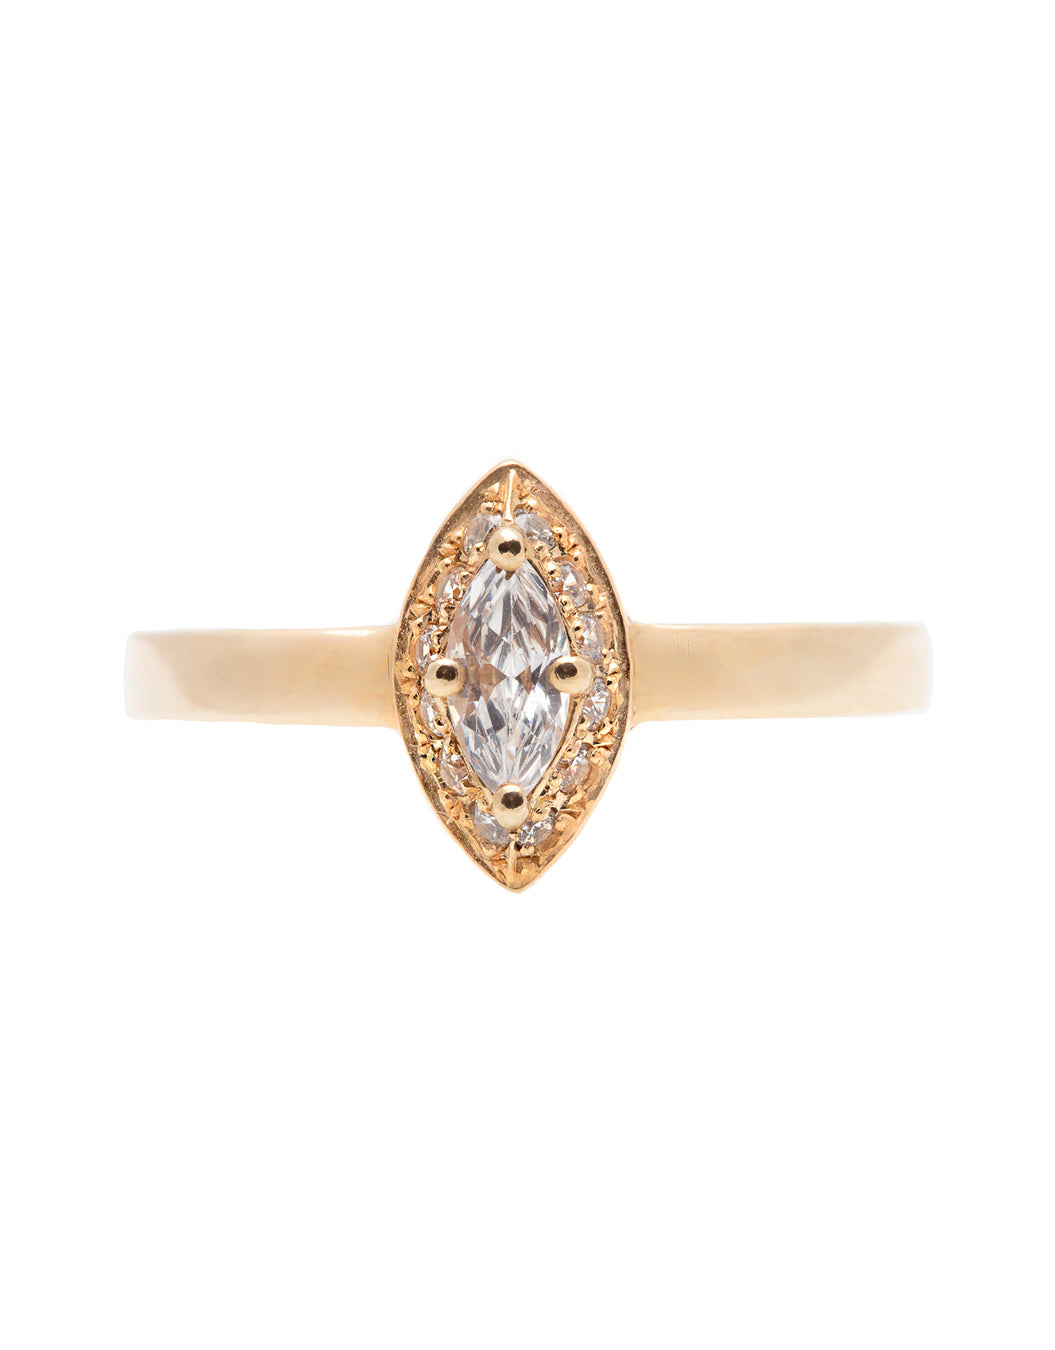 Marquise Cut Diamond Ring with Halo